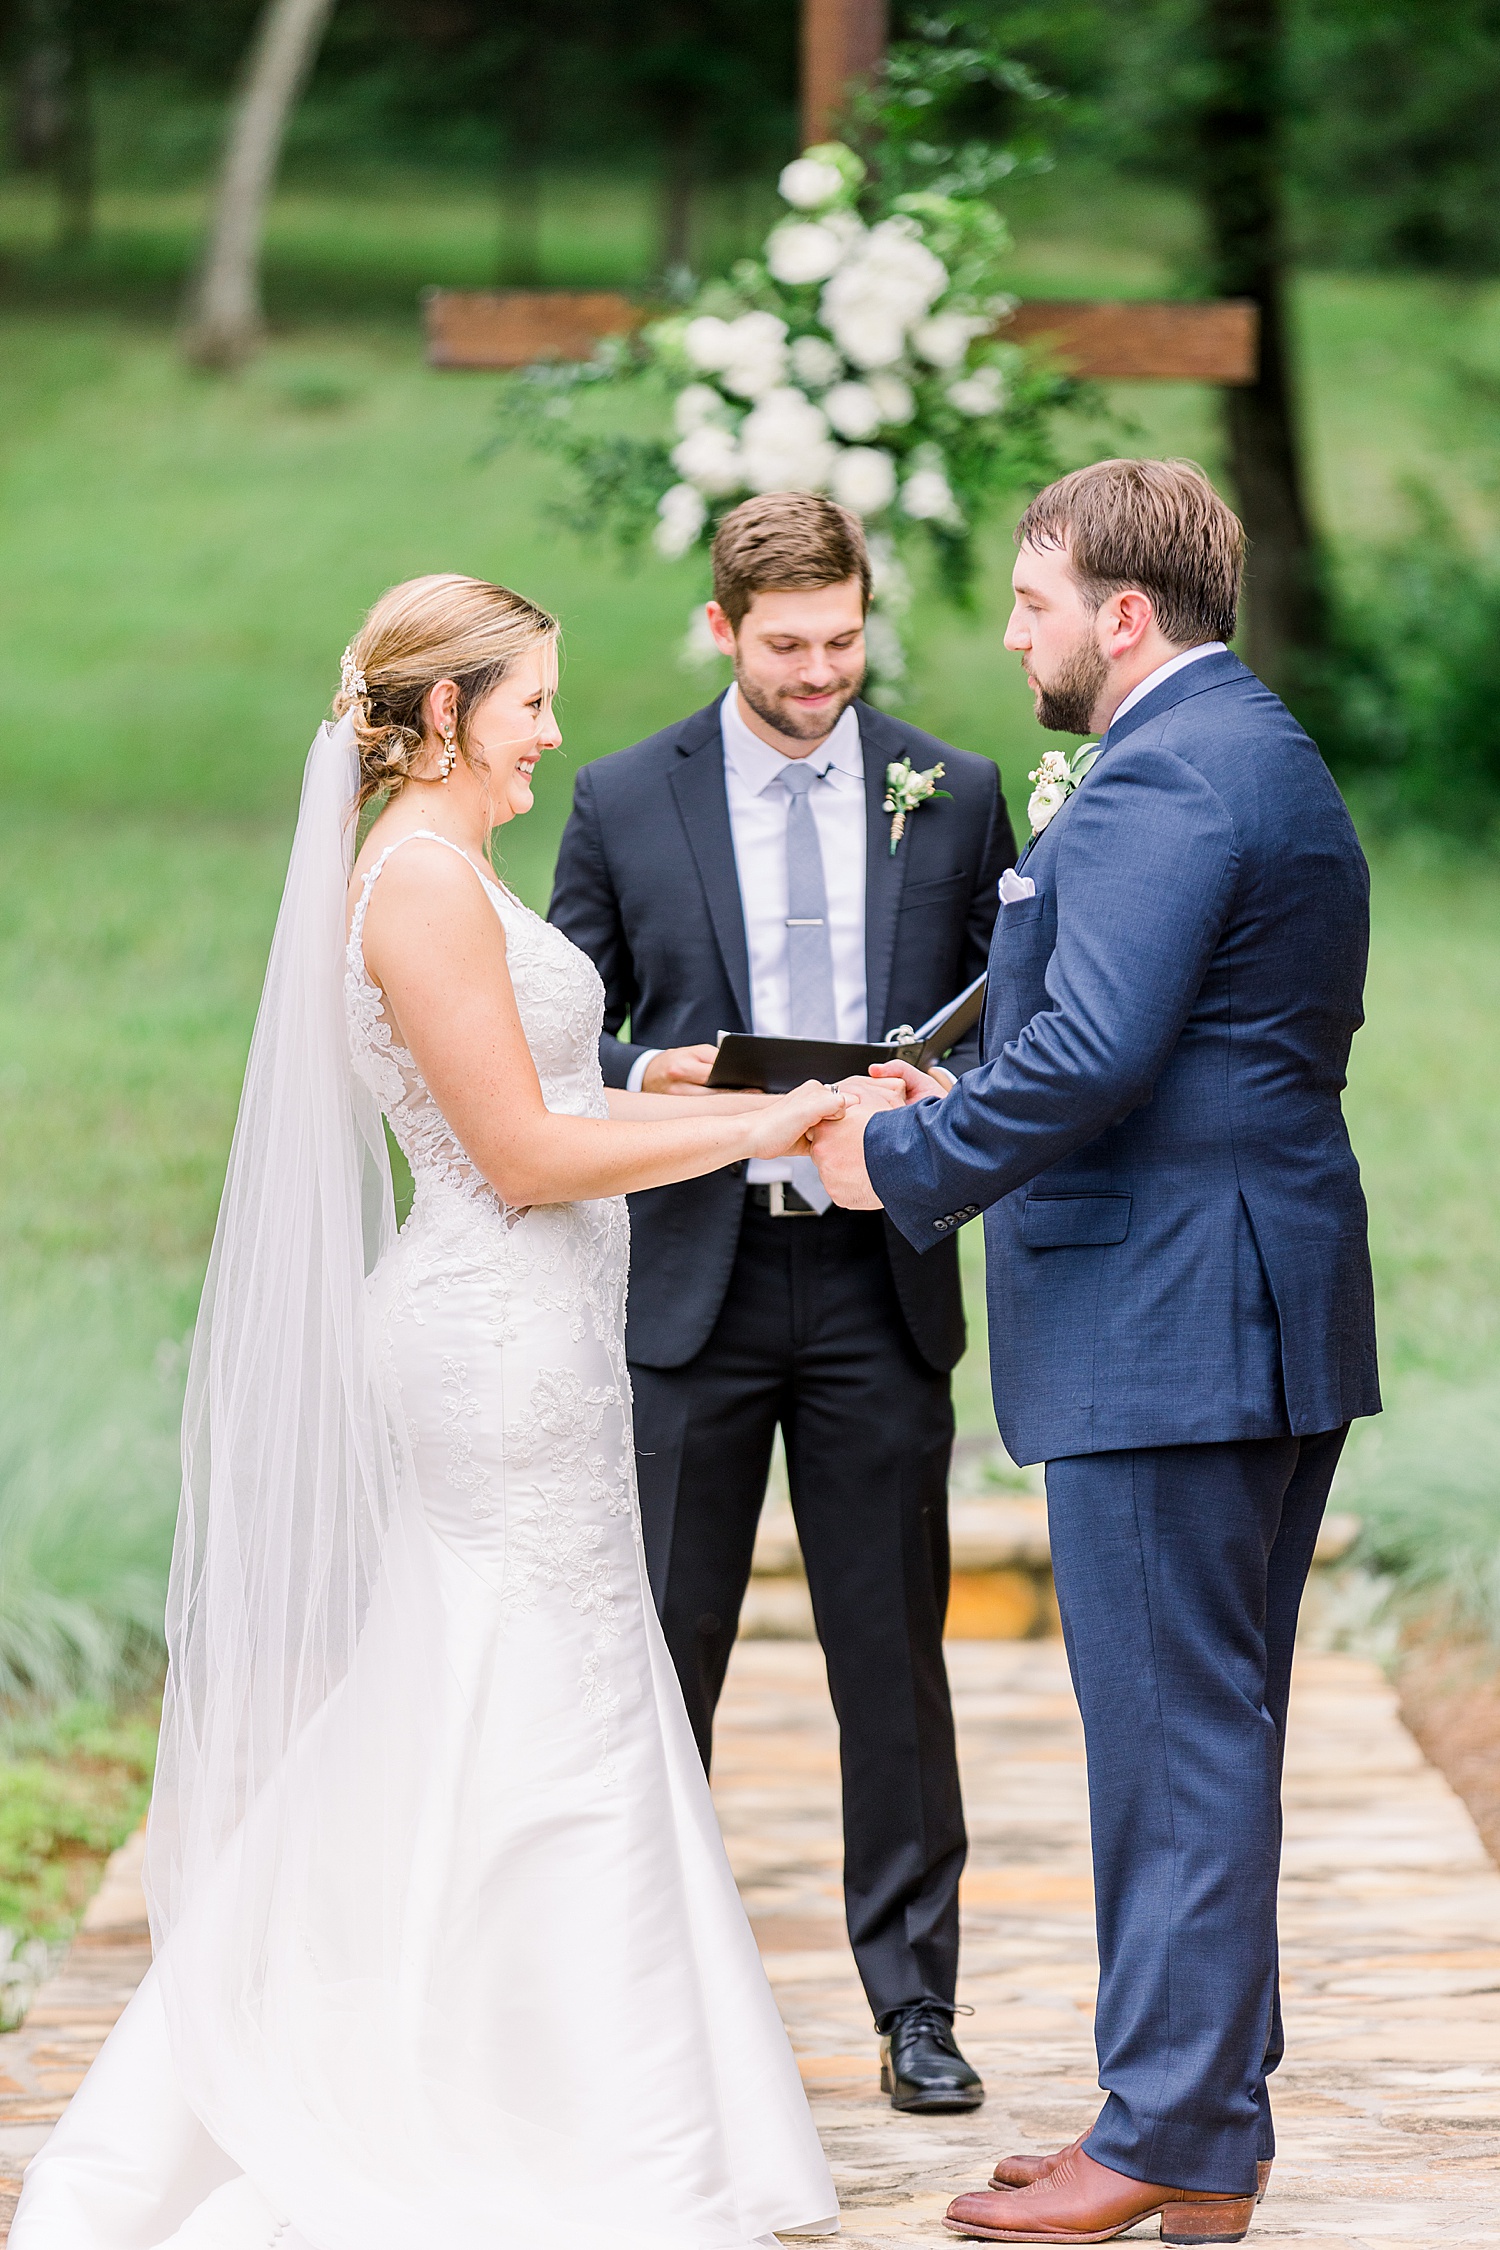 Bride + Groom exchange vows at Belle Farm Summer wedding by Chelsea Morton Photography